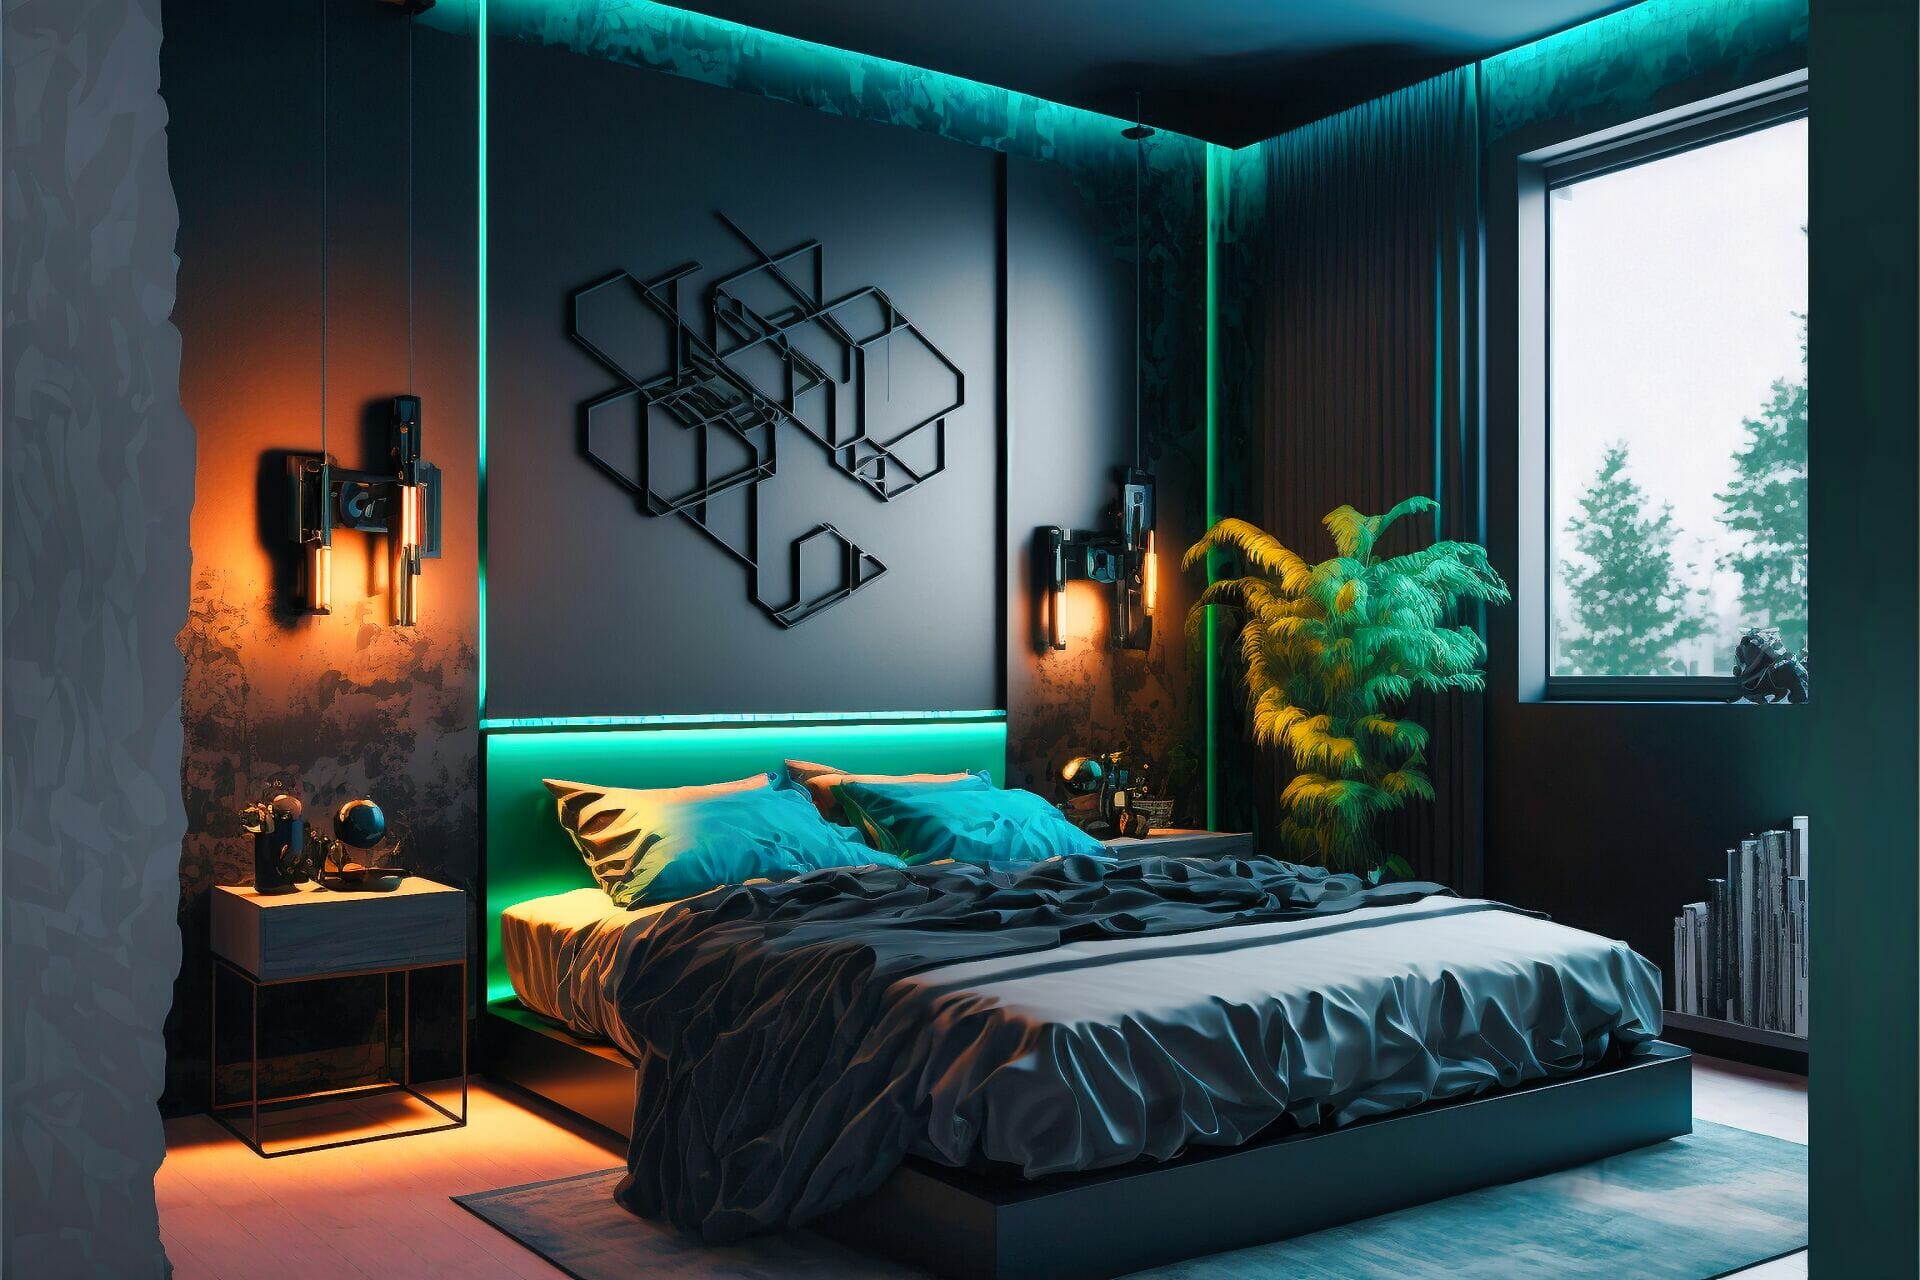 Bedroom With A Dark And Moody Cyberpunk Style. The Walls Are Painted A Deep Black, With An Iridescent Sheen And Neon Accents. The Center Of The Room Features A Large, Black Bed, With A Matching Bed Frame And Nightstands. The Lighting Is Low And Ambient, With A Light Strip Running Along The Walls, And A Hanging Neon Bulb Providing The Main Lighting Source. The Floor Is An Industrial Tile With A Glossy Finish.